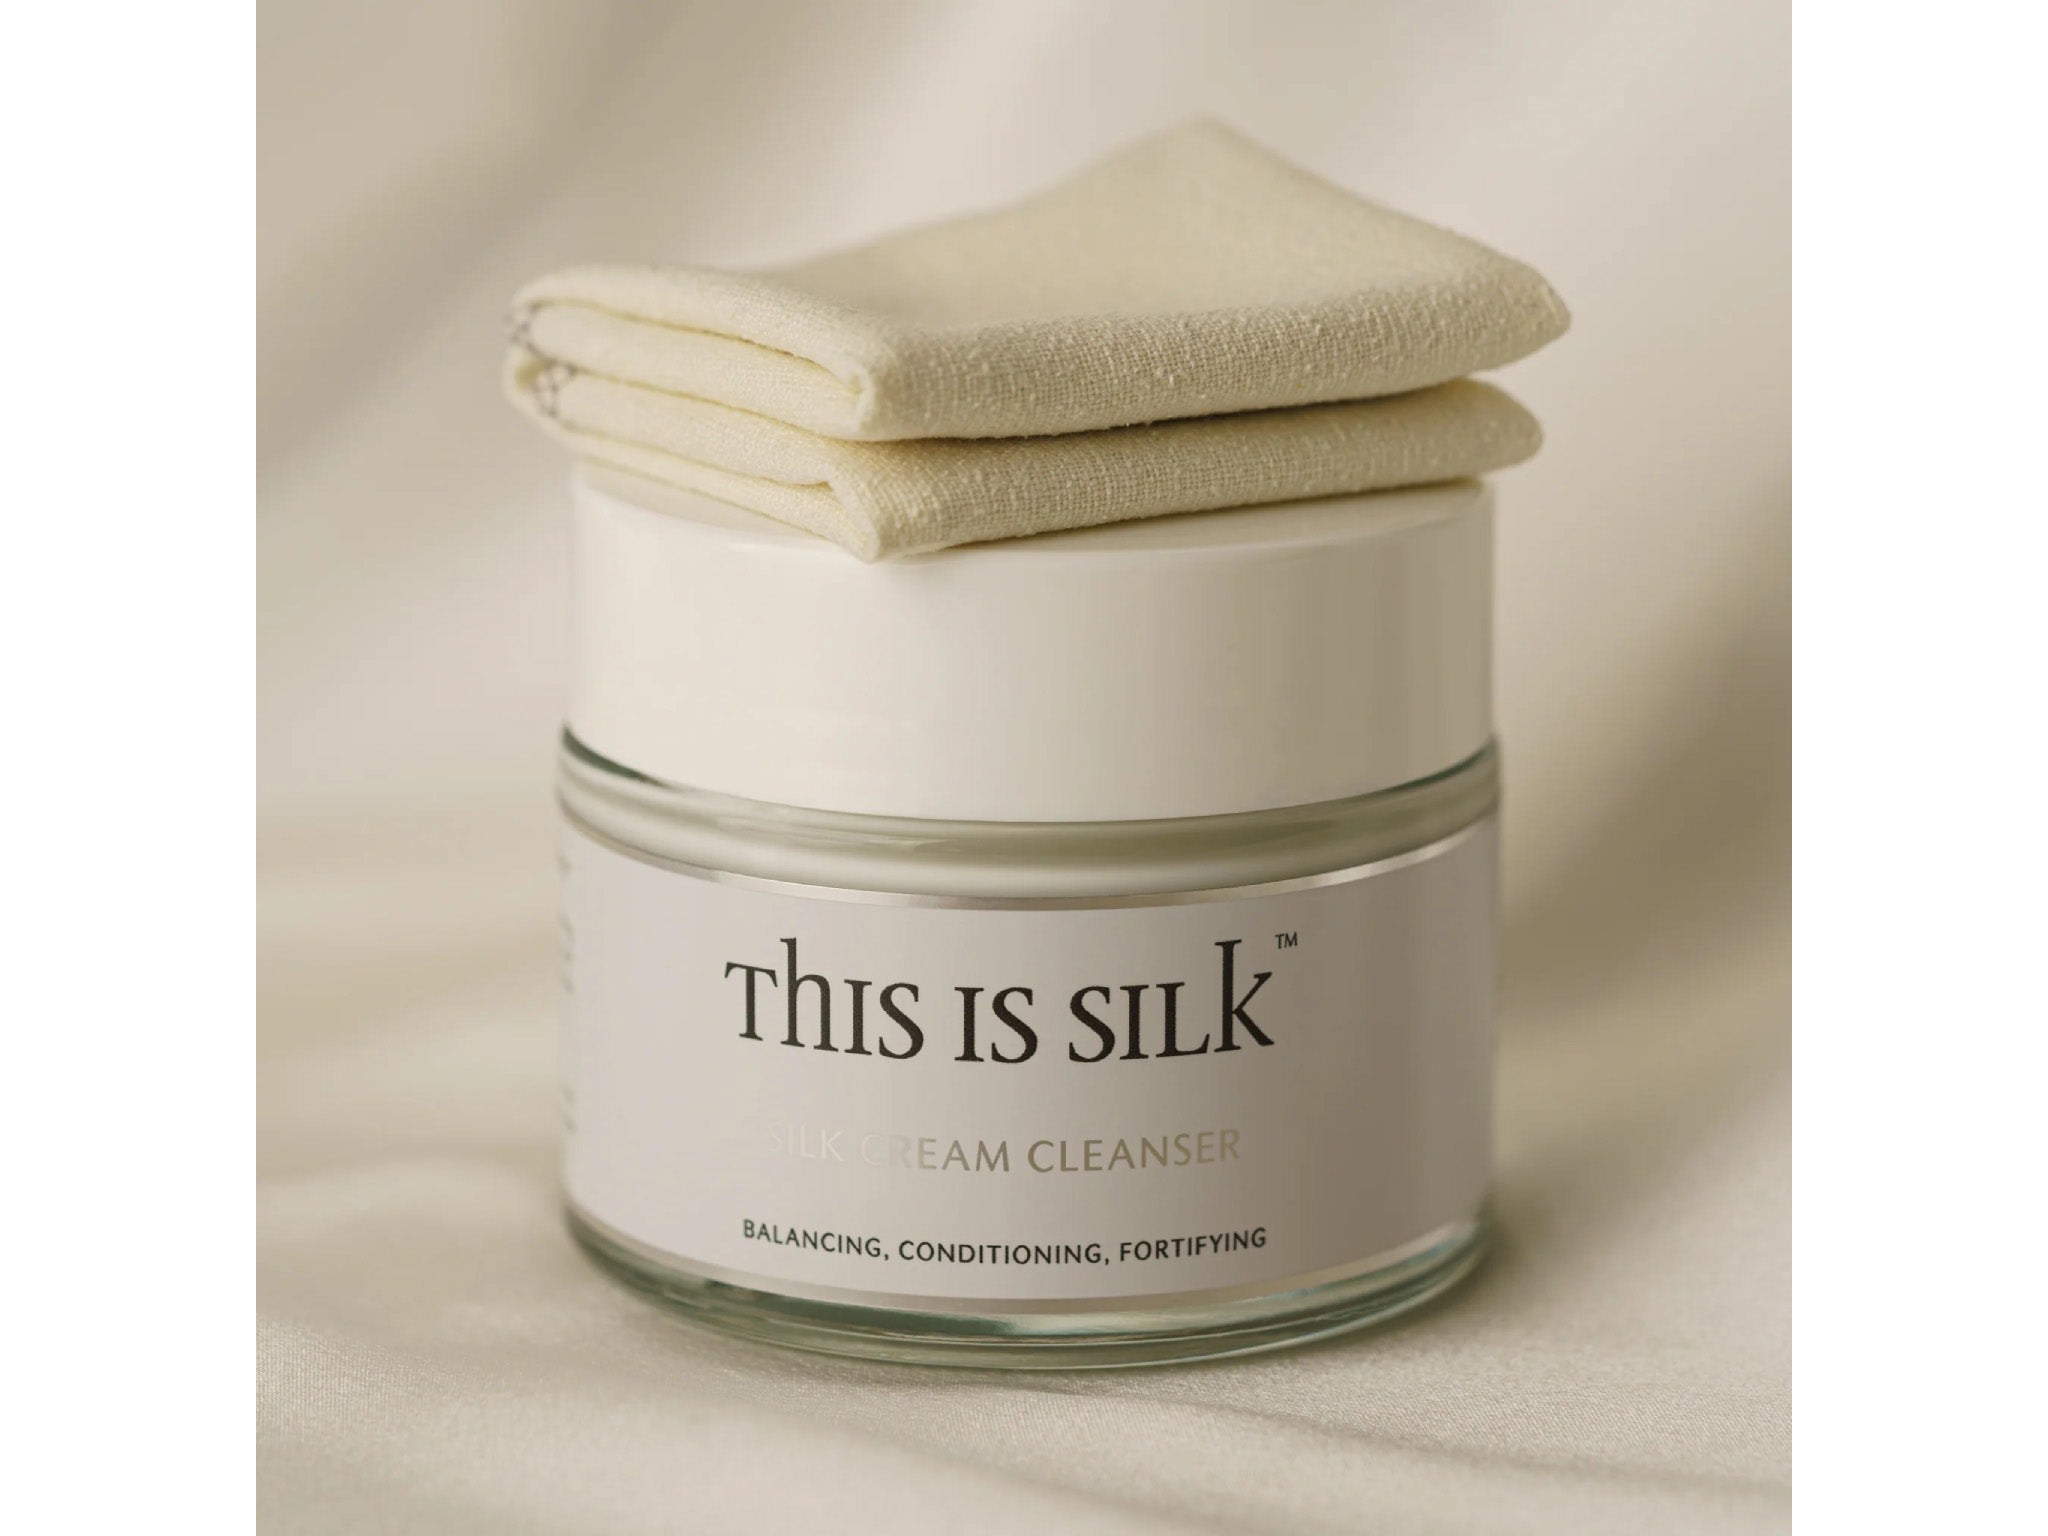 This Is Silk cleanser Indybest review